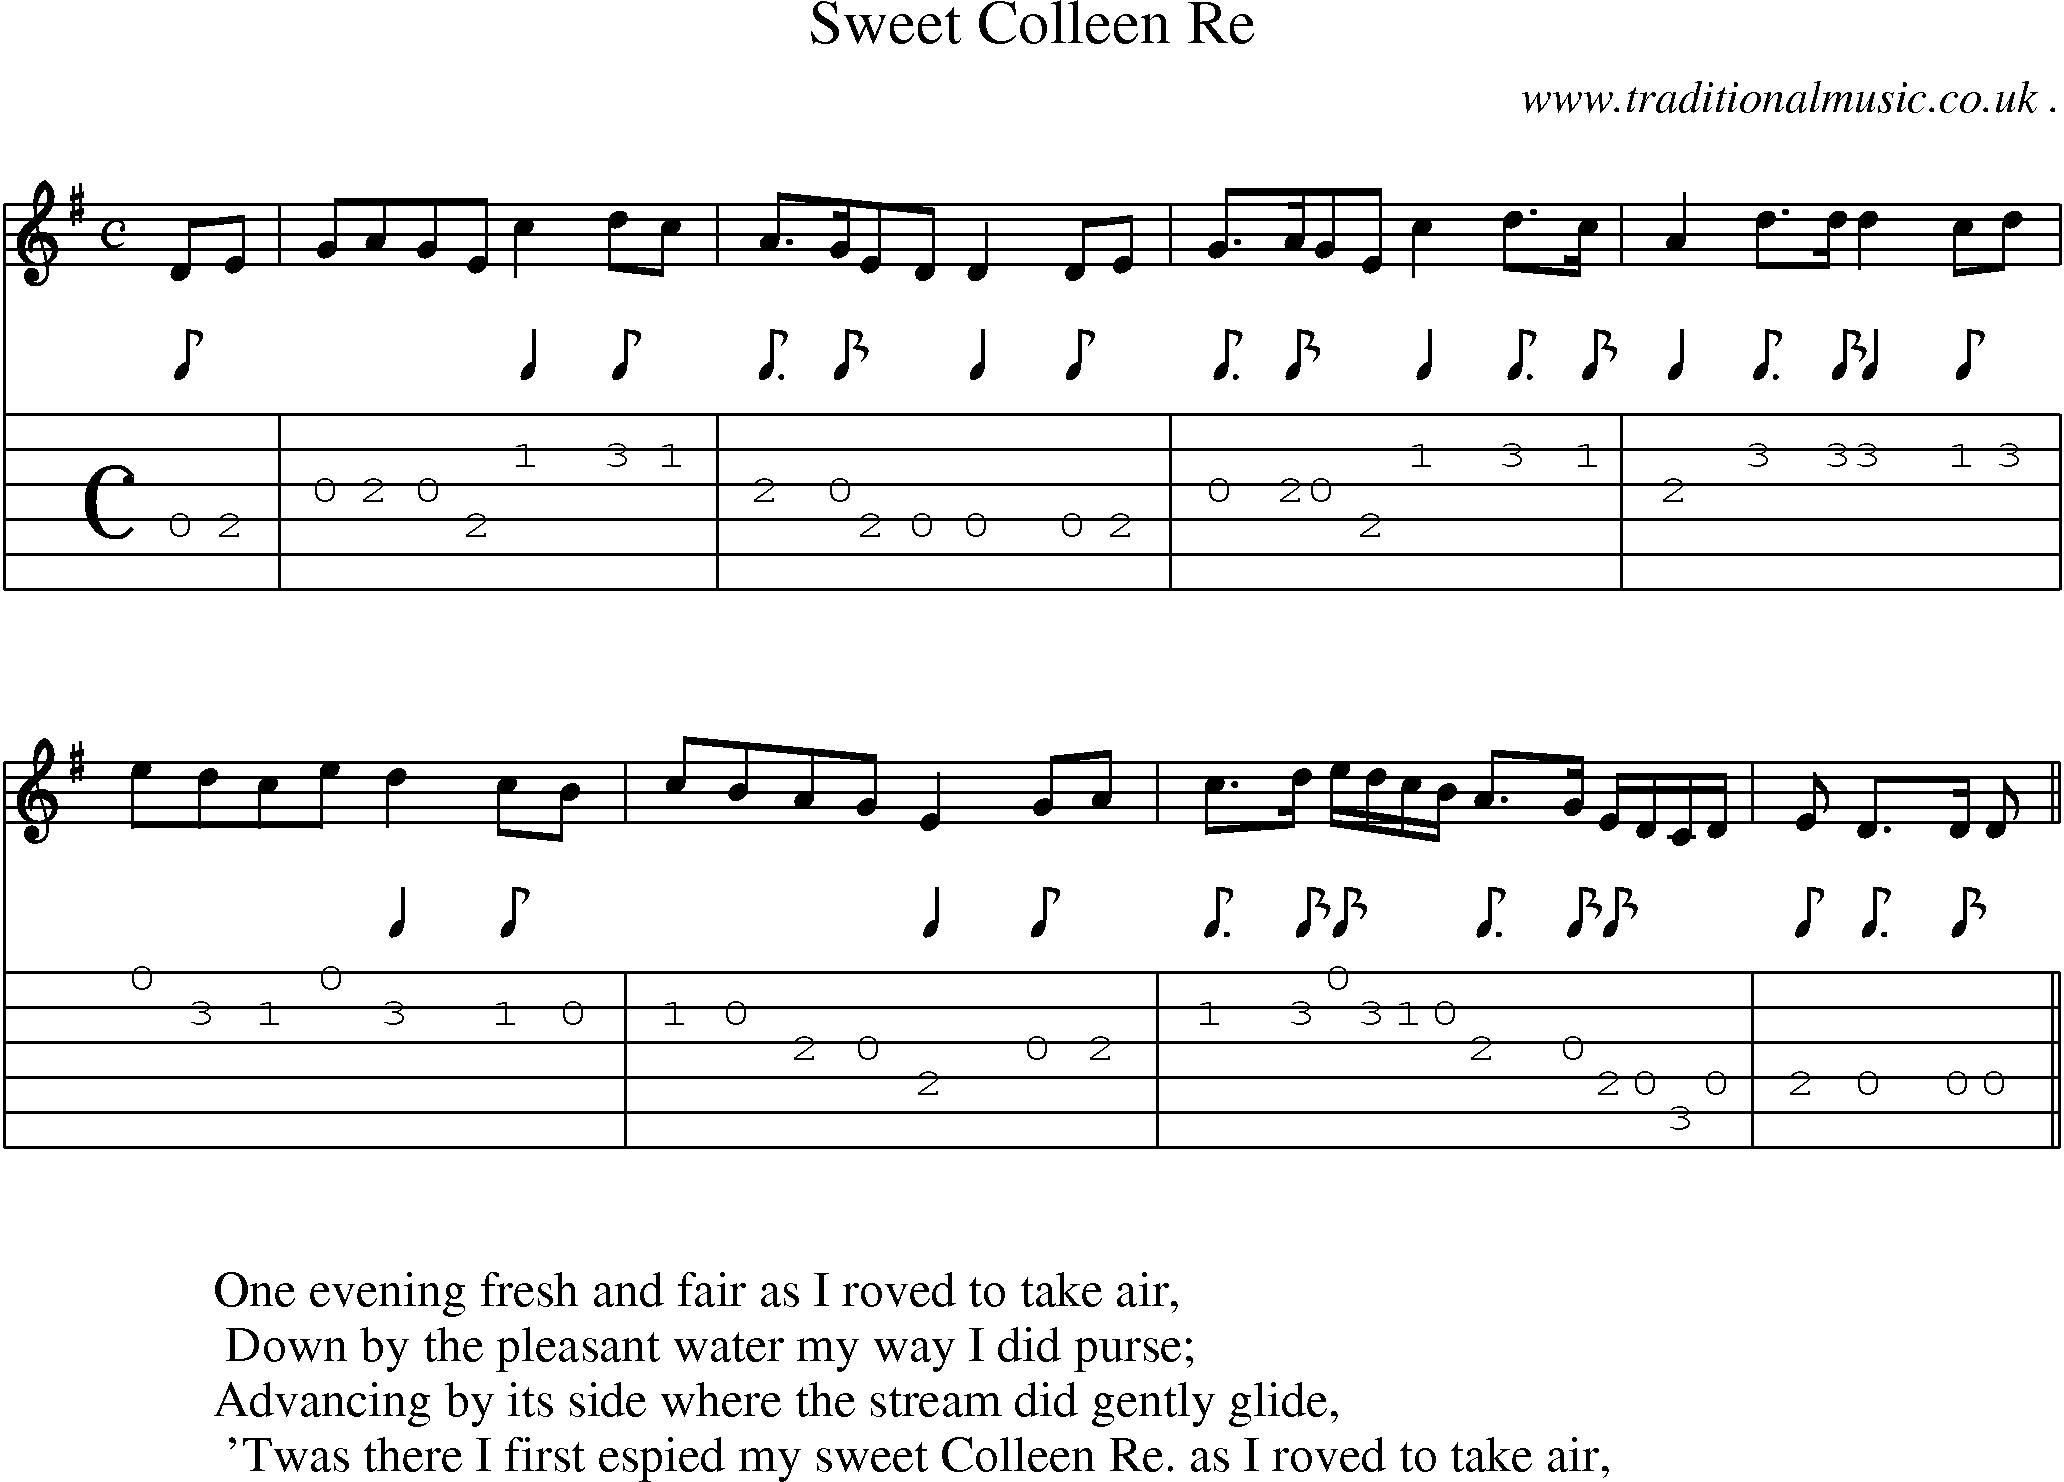 Sheet-Music and Guitar Tabs for Sweet Colleen Re